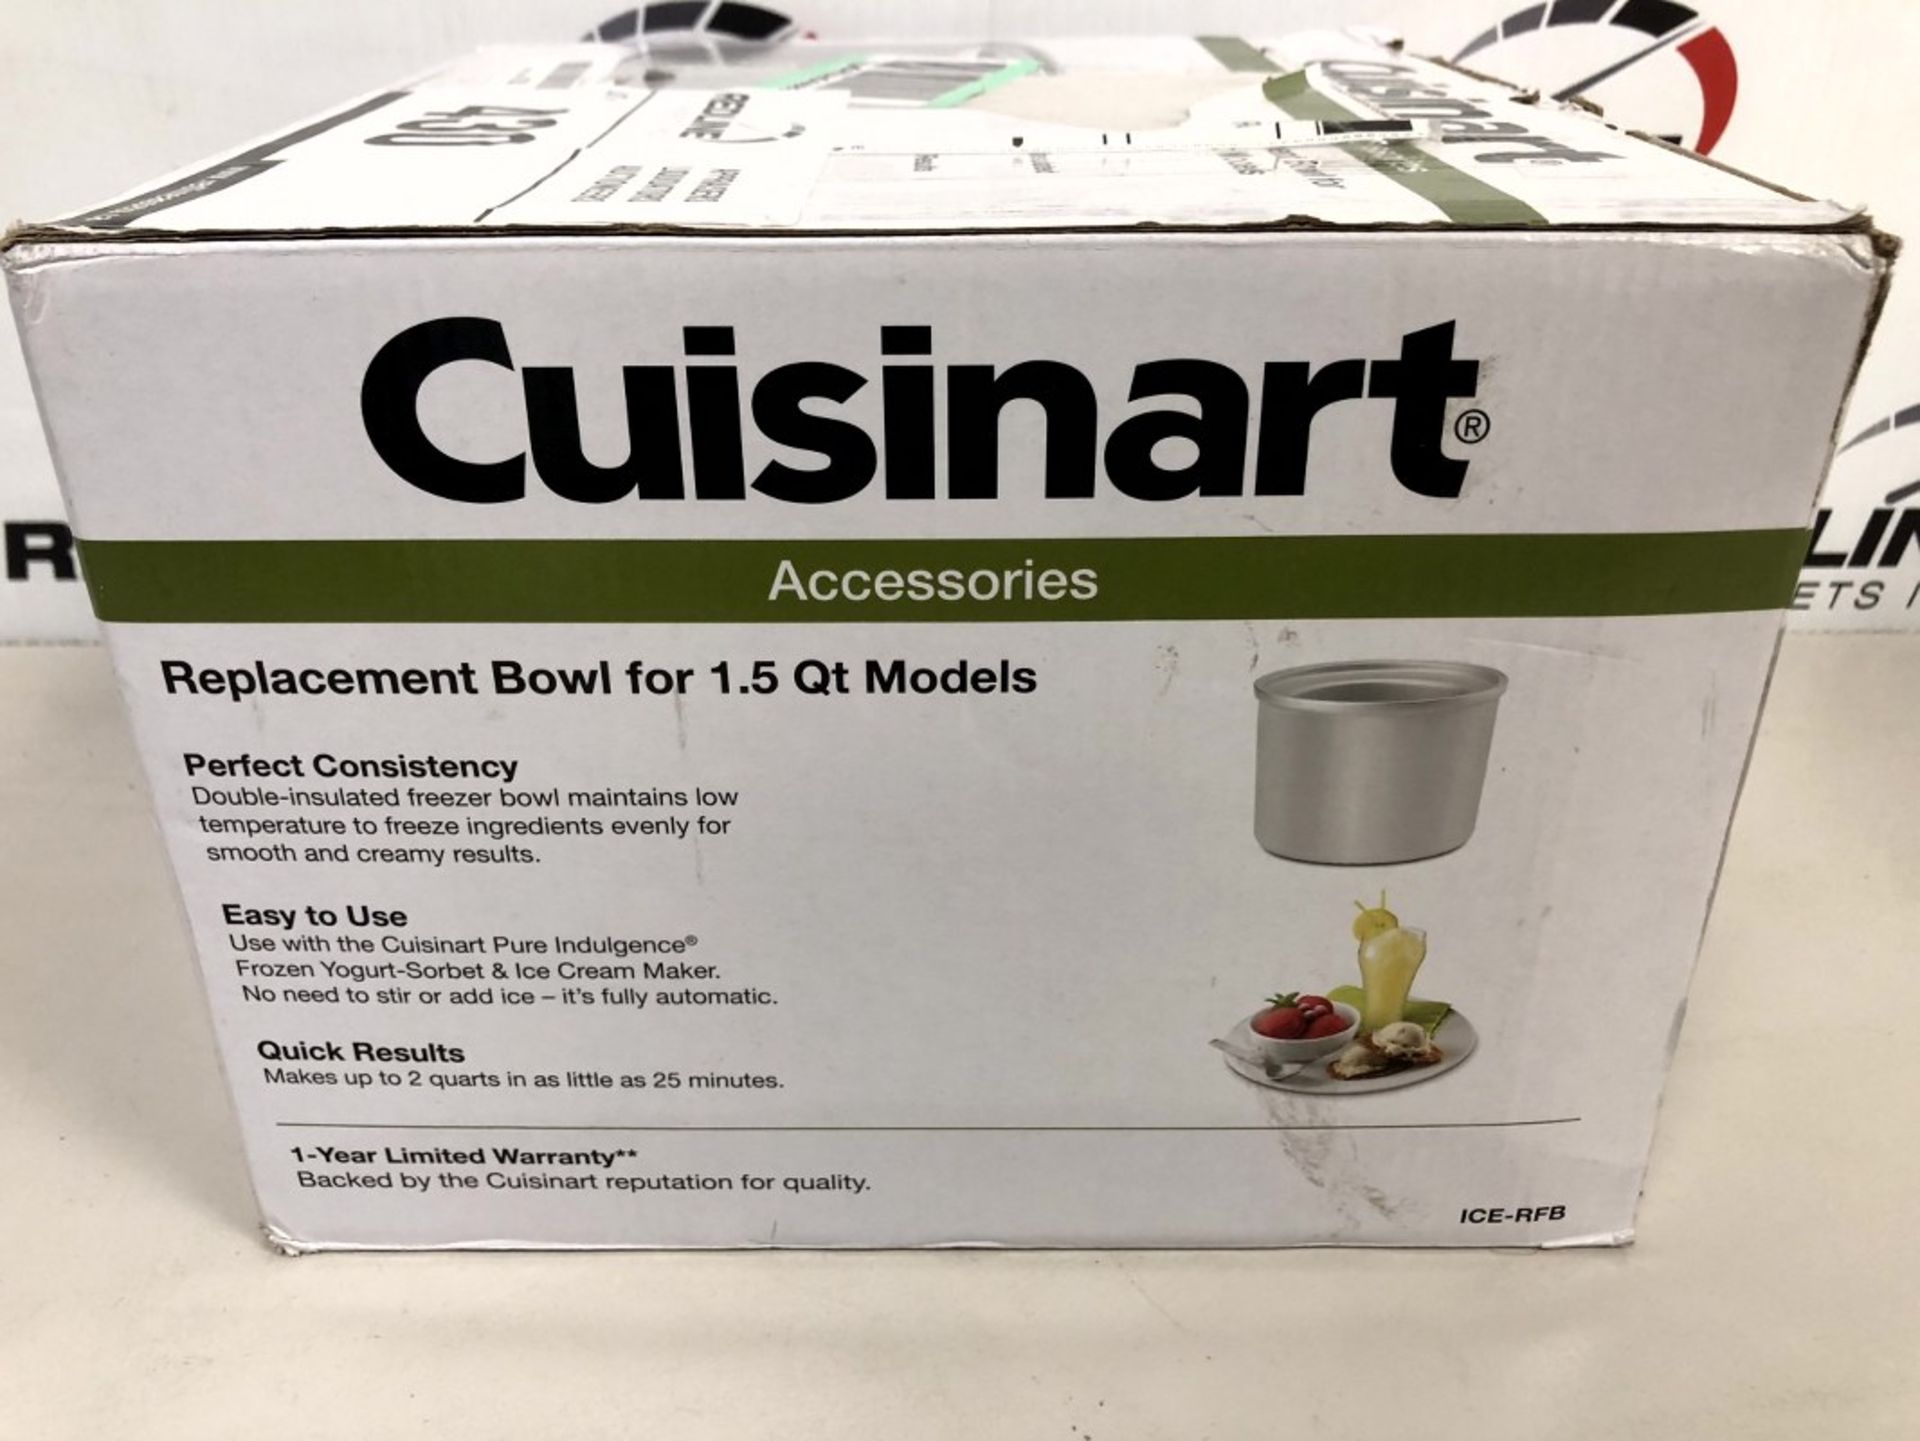 Cuisinart - Replacement Bowl For 1.5 Qt Models - Image 2 of 2